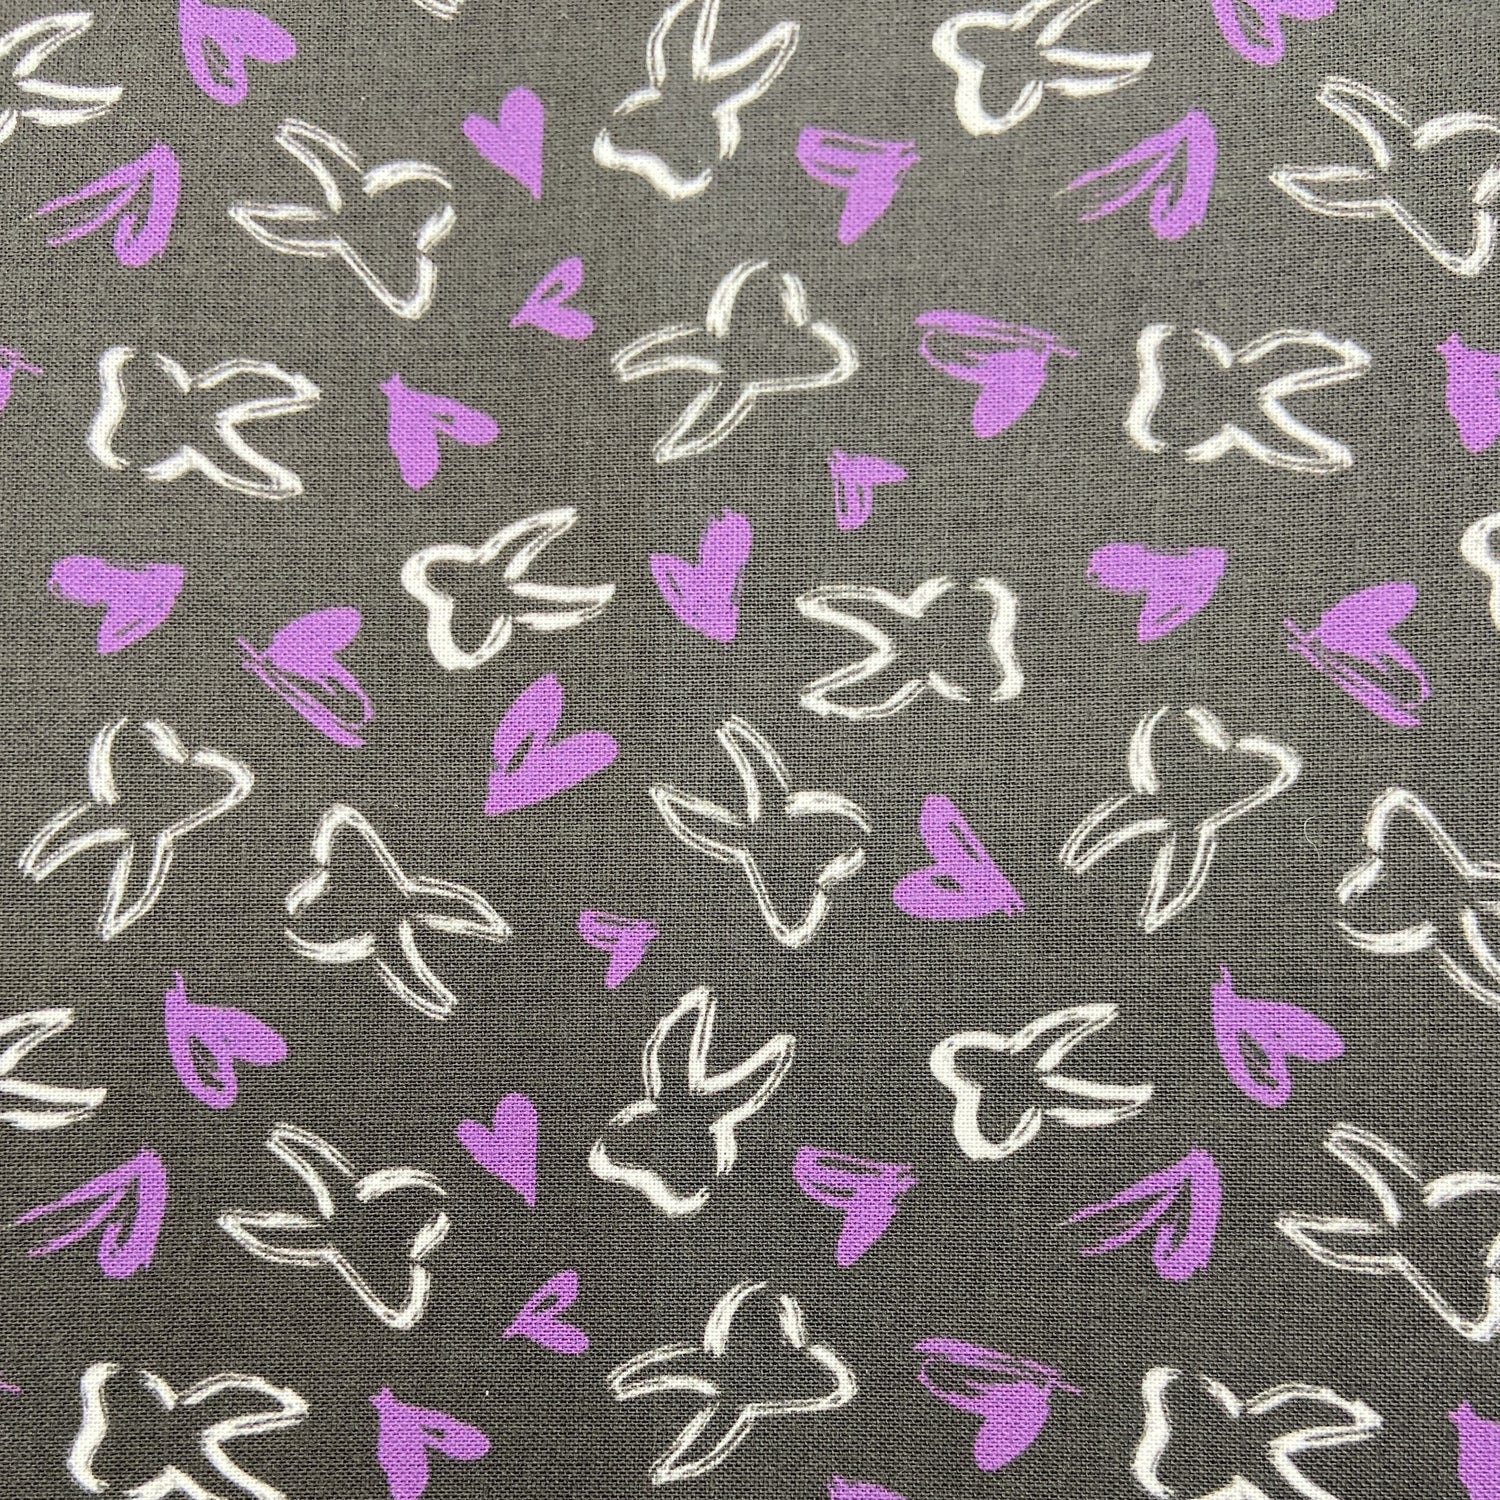 Black, purple and white tooth fabric print